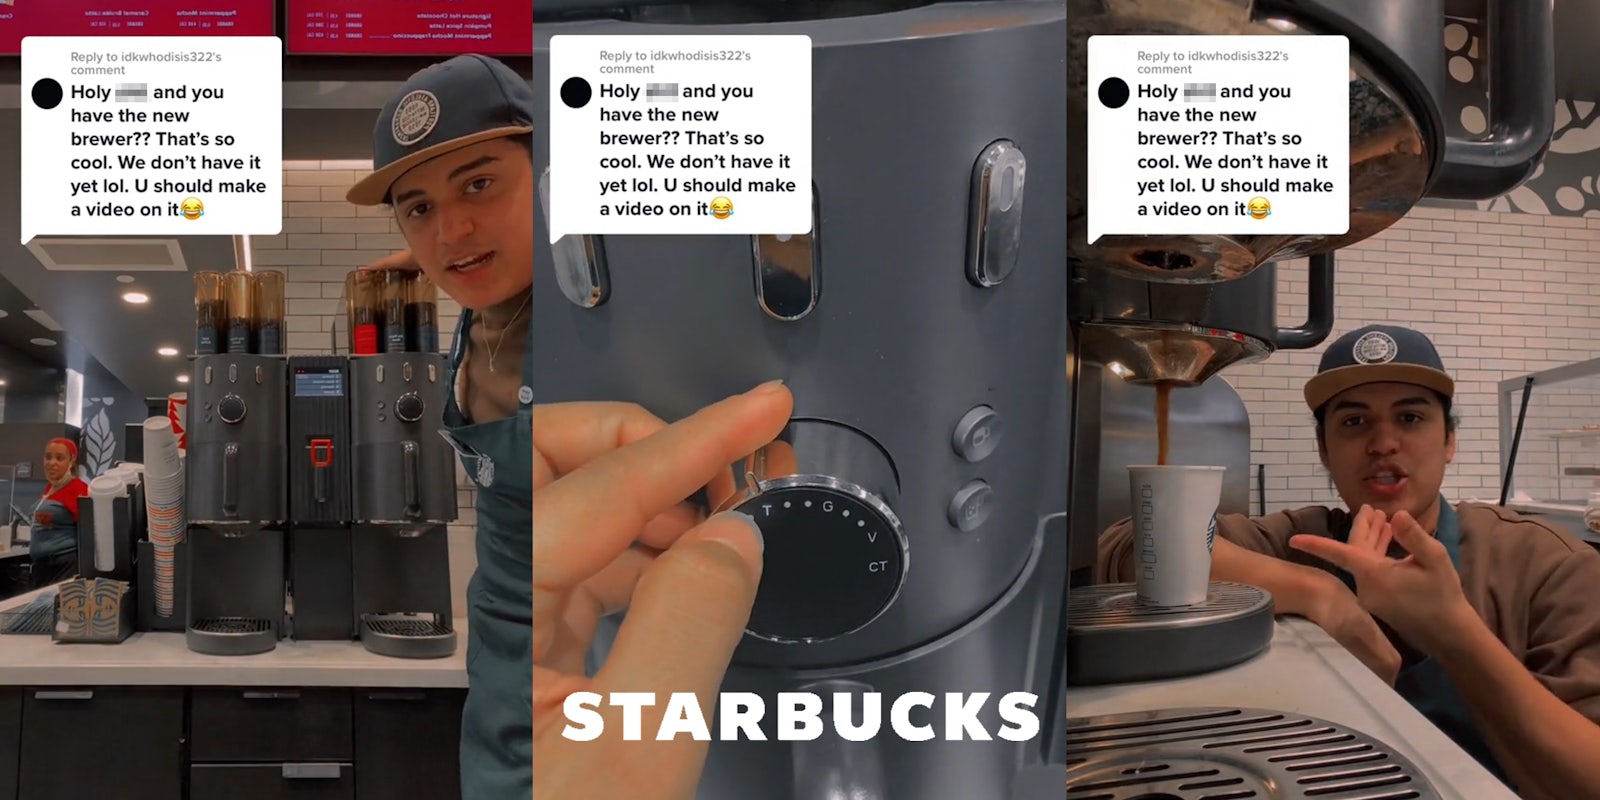 Starbucks barista with brewing machine caption 'Holy blank and you have the new brewer?? That's so cool. We don't have it yet lol. U should make a video on it' (l) hand on brewing machine with Starbucks logo centered at bottom caption 'Holy blank and you have the new brewer?? That's so cool. We don't have it yet lol. U should make a video on it' (c) Starbucks barista pointing to coffee in brewing machine caption 'Holy blank and you have the new brewer?? That's so cool. We don't have it yet lol. U should make a video on it' (r)